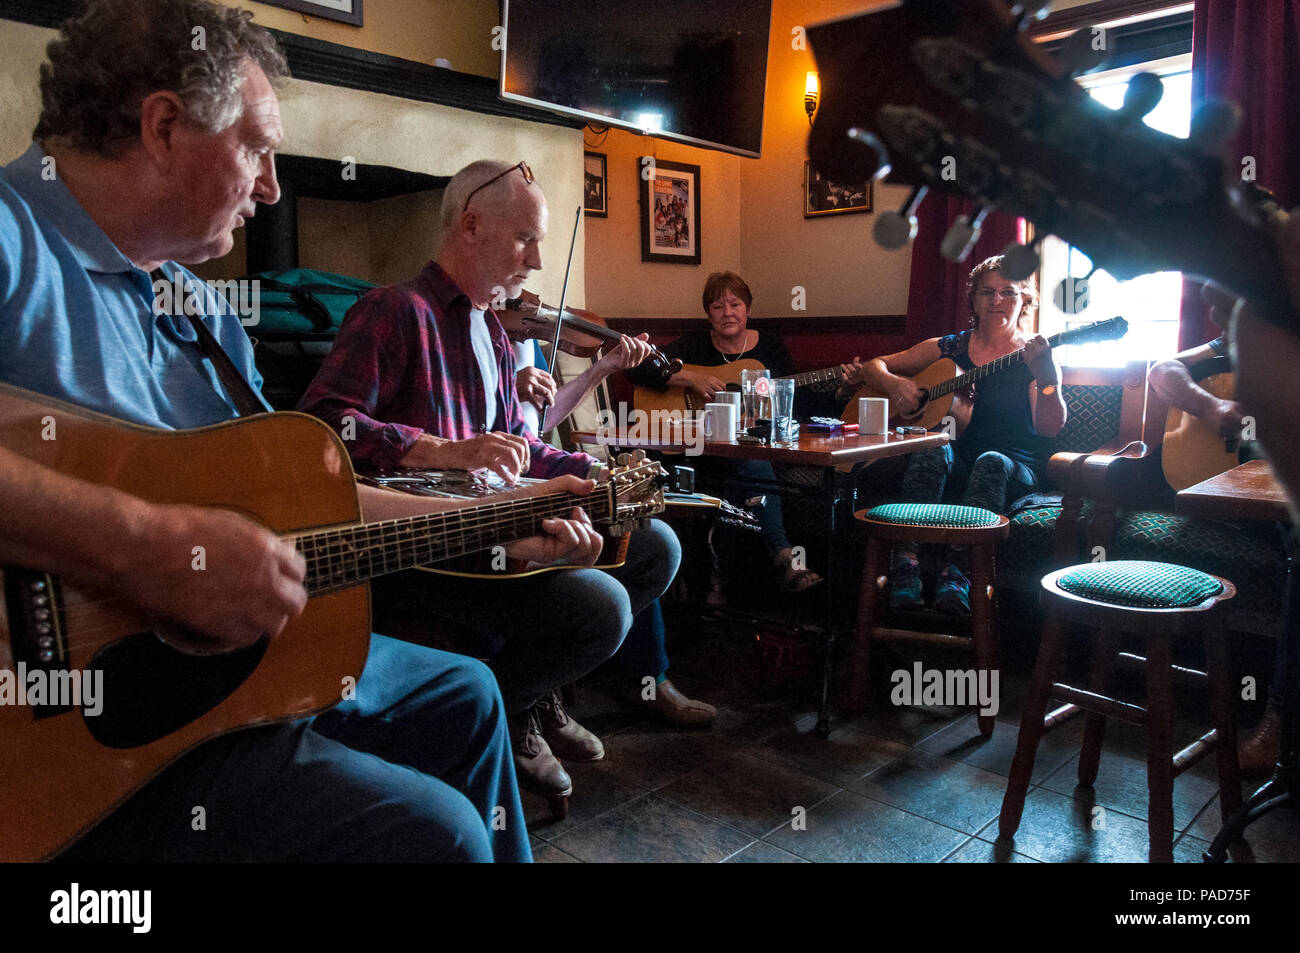 Ardara, County Donegal, Ireland. 22th July 2018. A musical buzz in The Beehive Bar as musicians play in the 11th annual Bluegrass Music Festival held in this north-west coastal village. Bluegrass music has links with the traditional music taken to USA by emigrating Irish and Scottish people in the 19th century. Credit: Richard Wayman/Alamy Live News Stock Photo